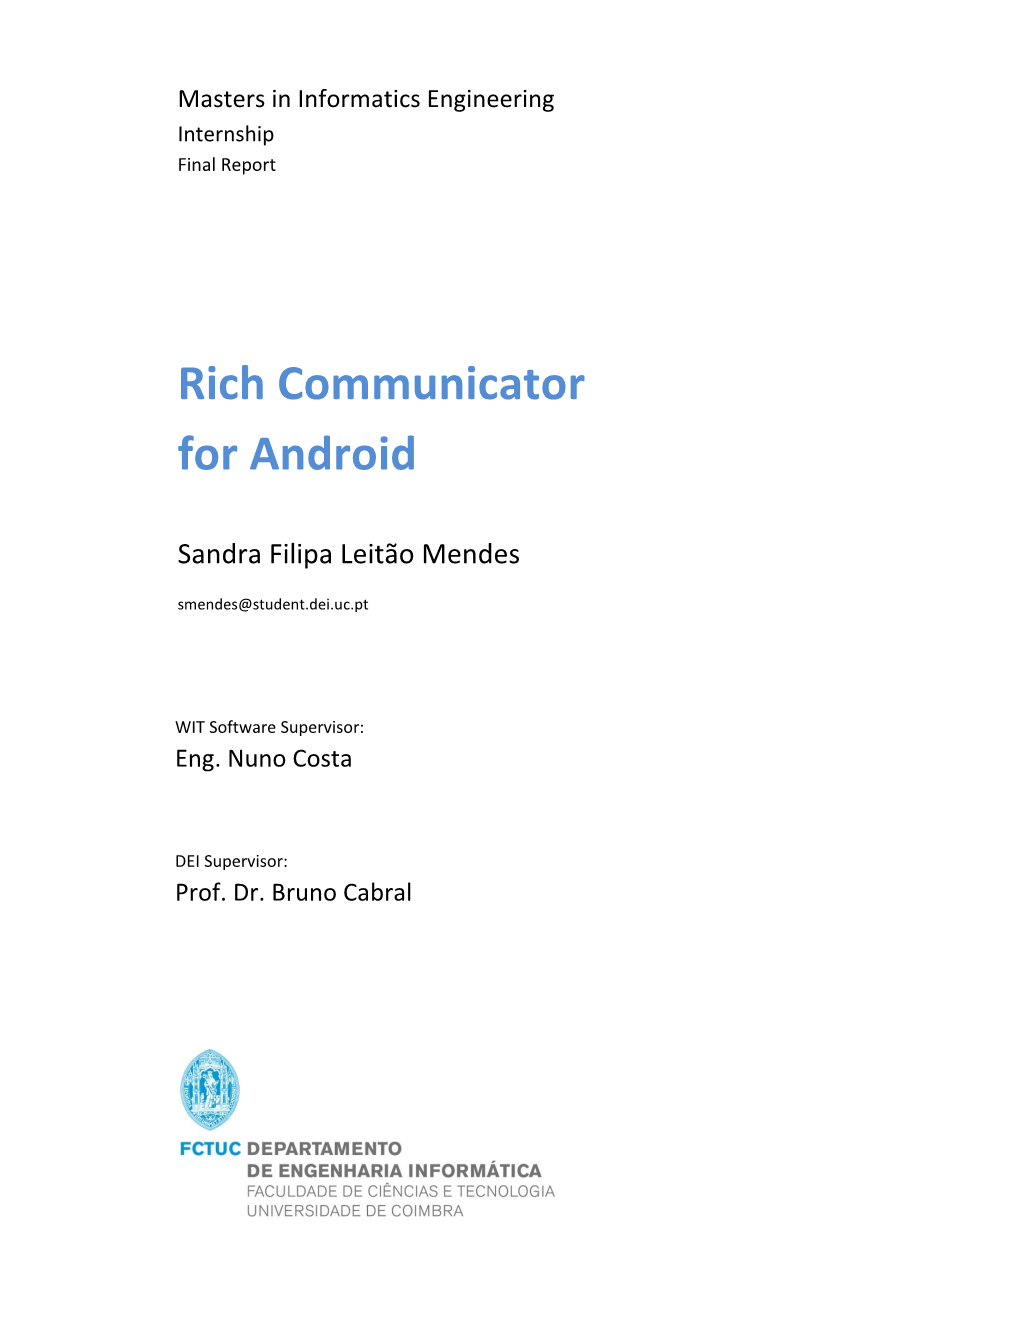 Rich Communicator for Android